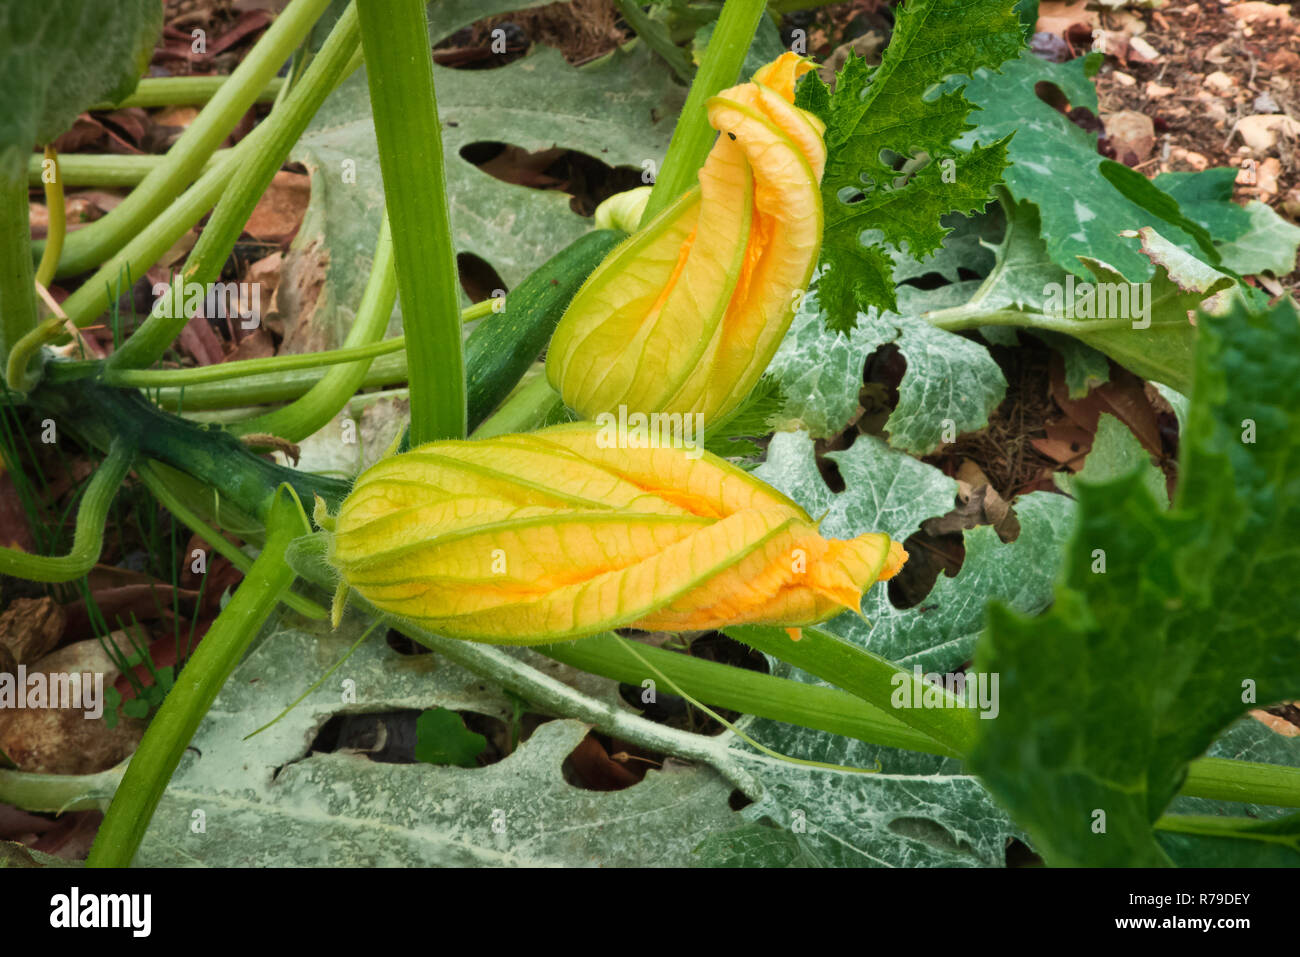 courgette flowers Stock Photo